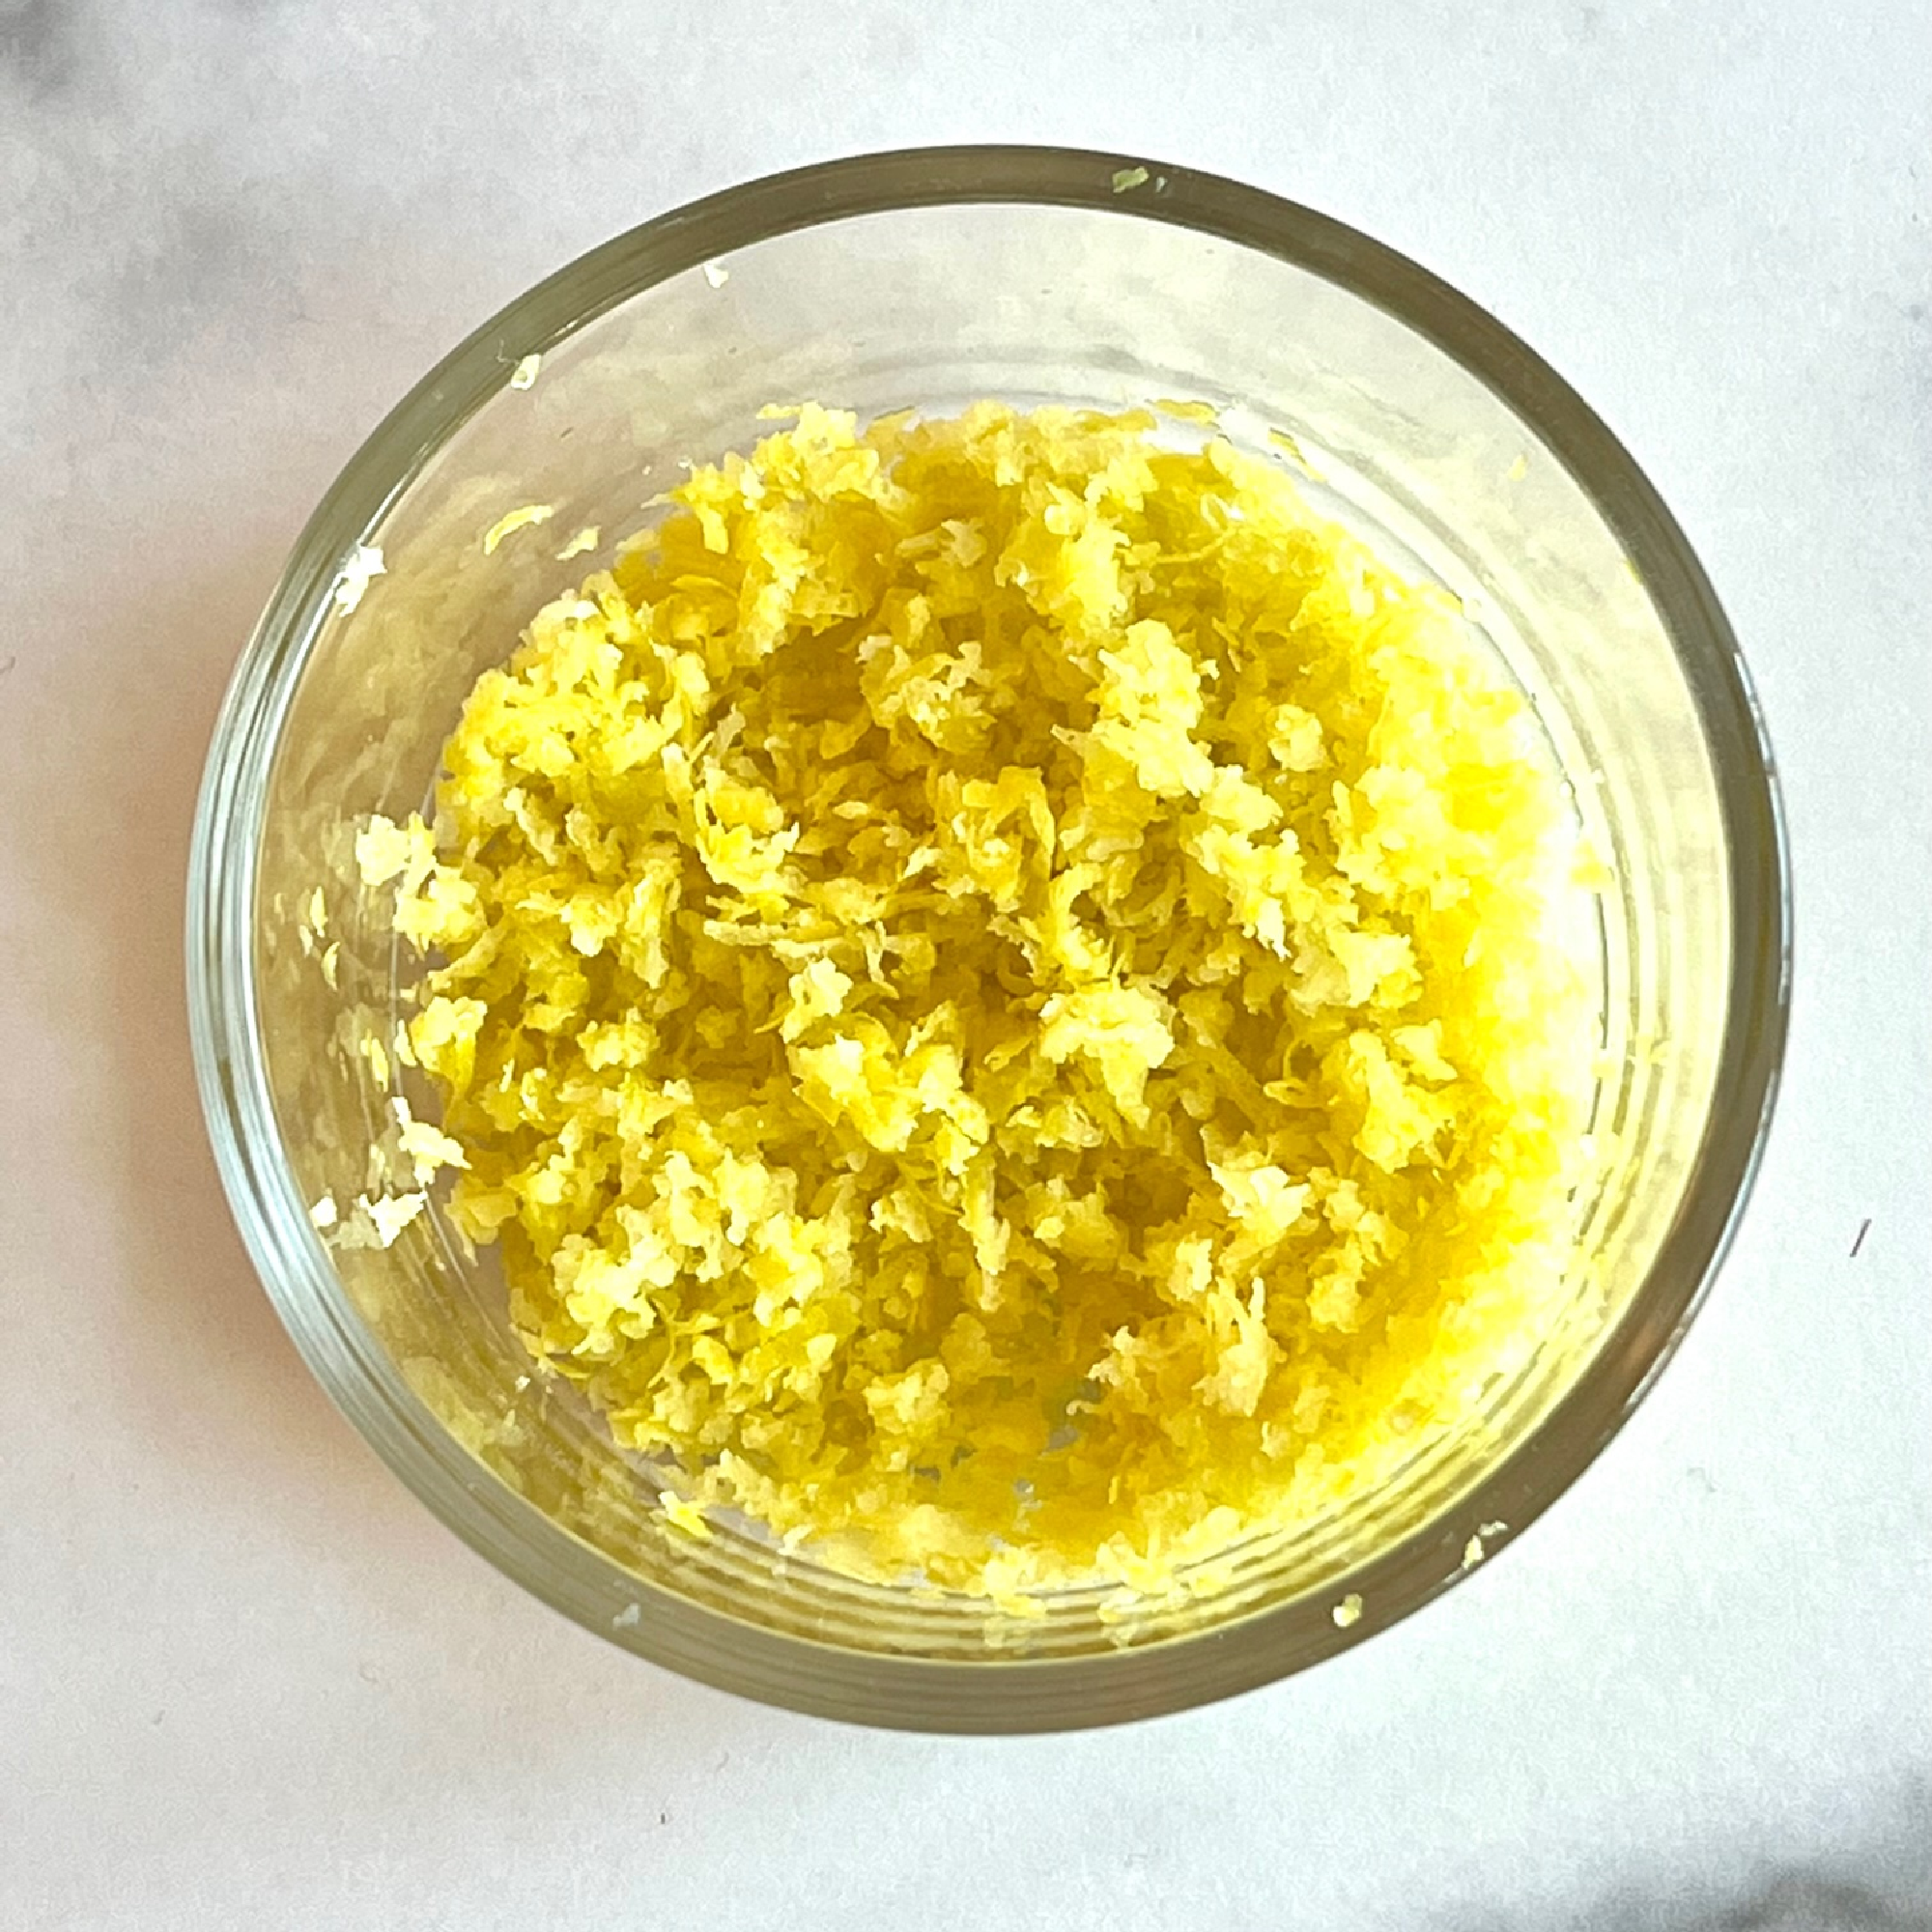 This is a photo of grated lemon peel in a small clear glass bowl. 